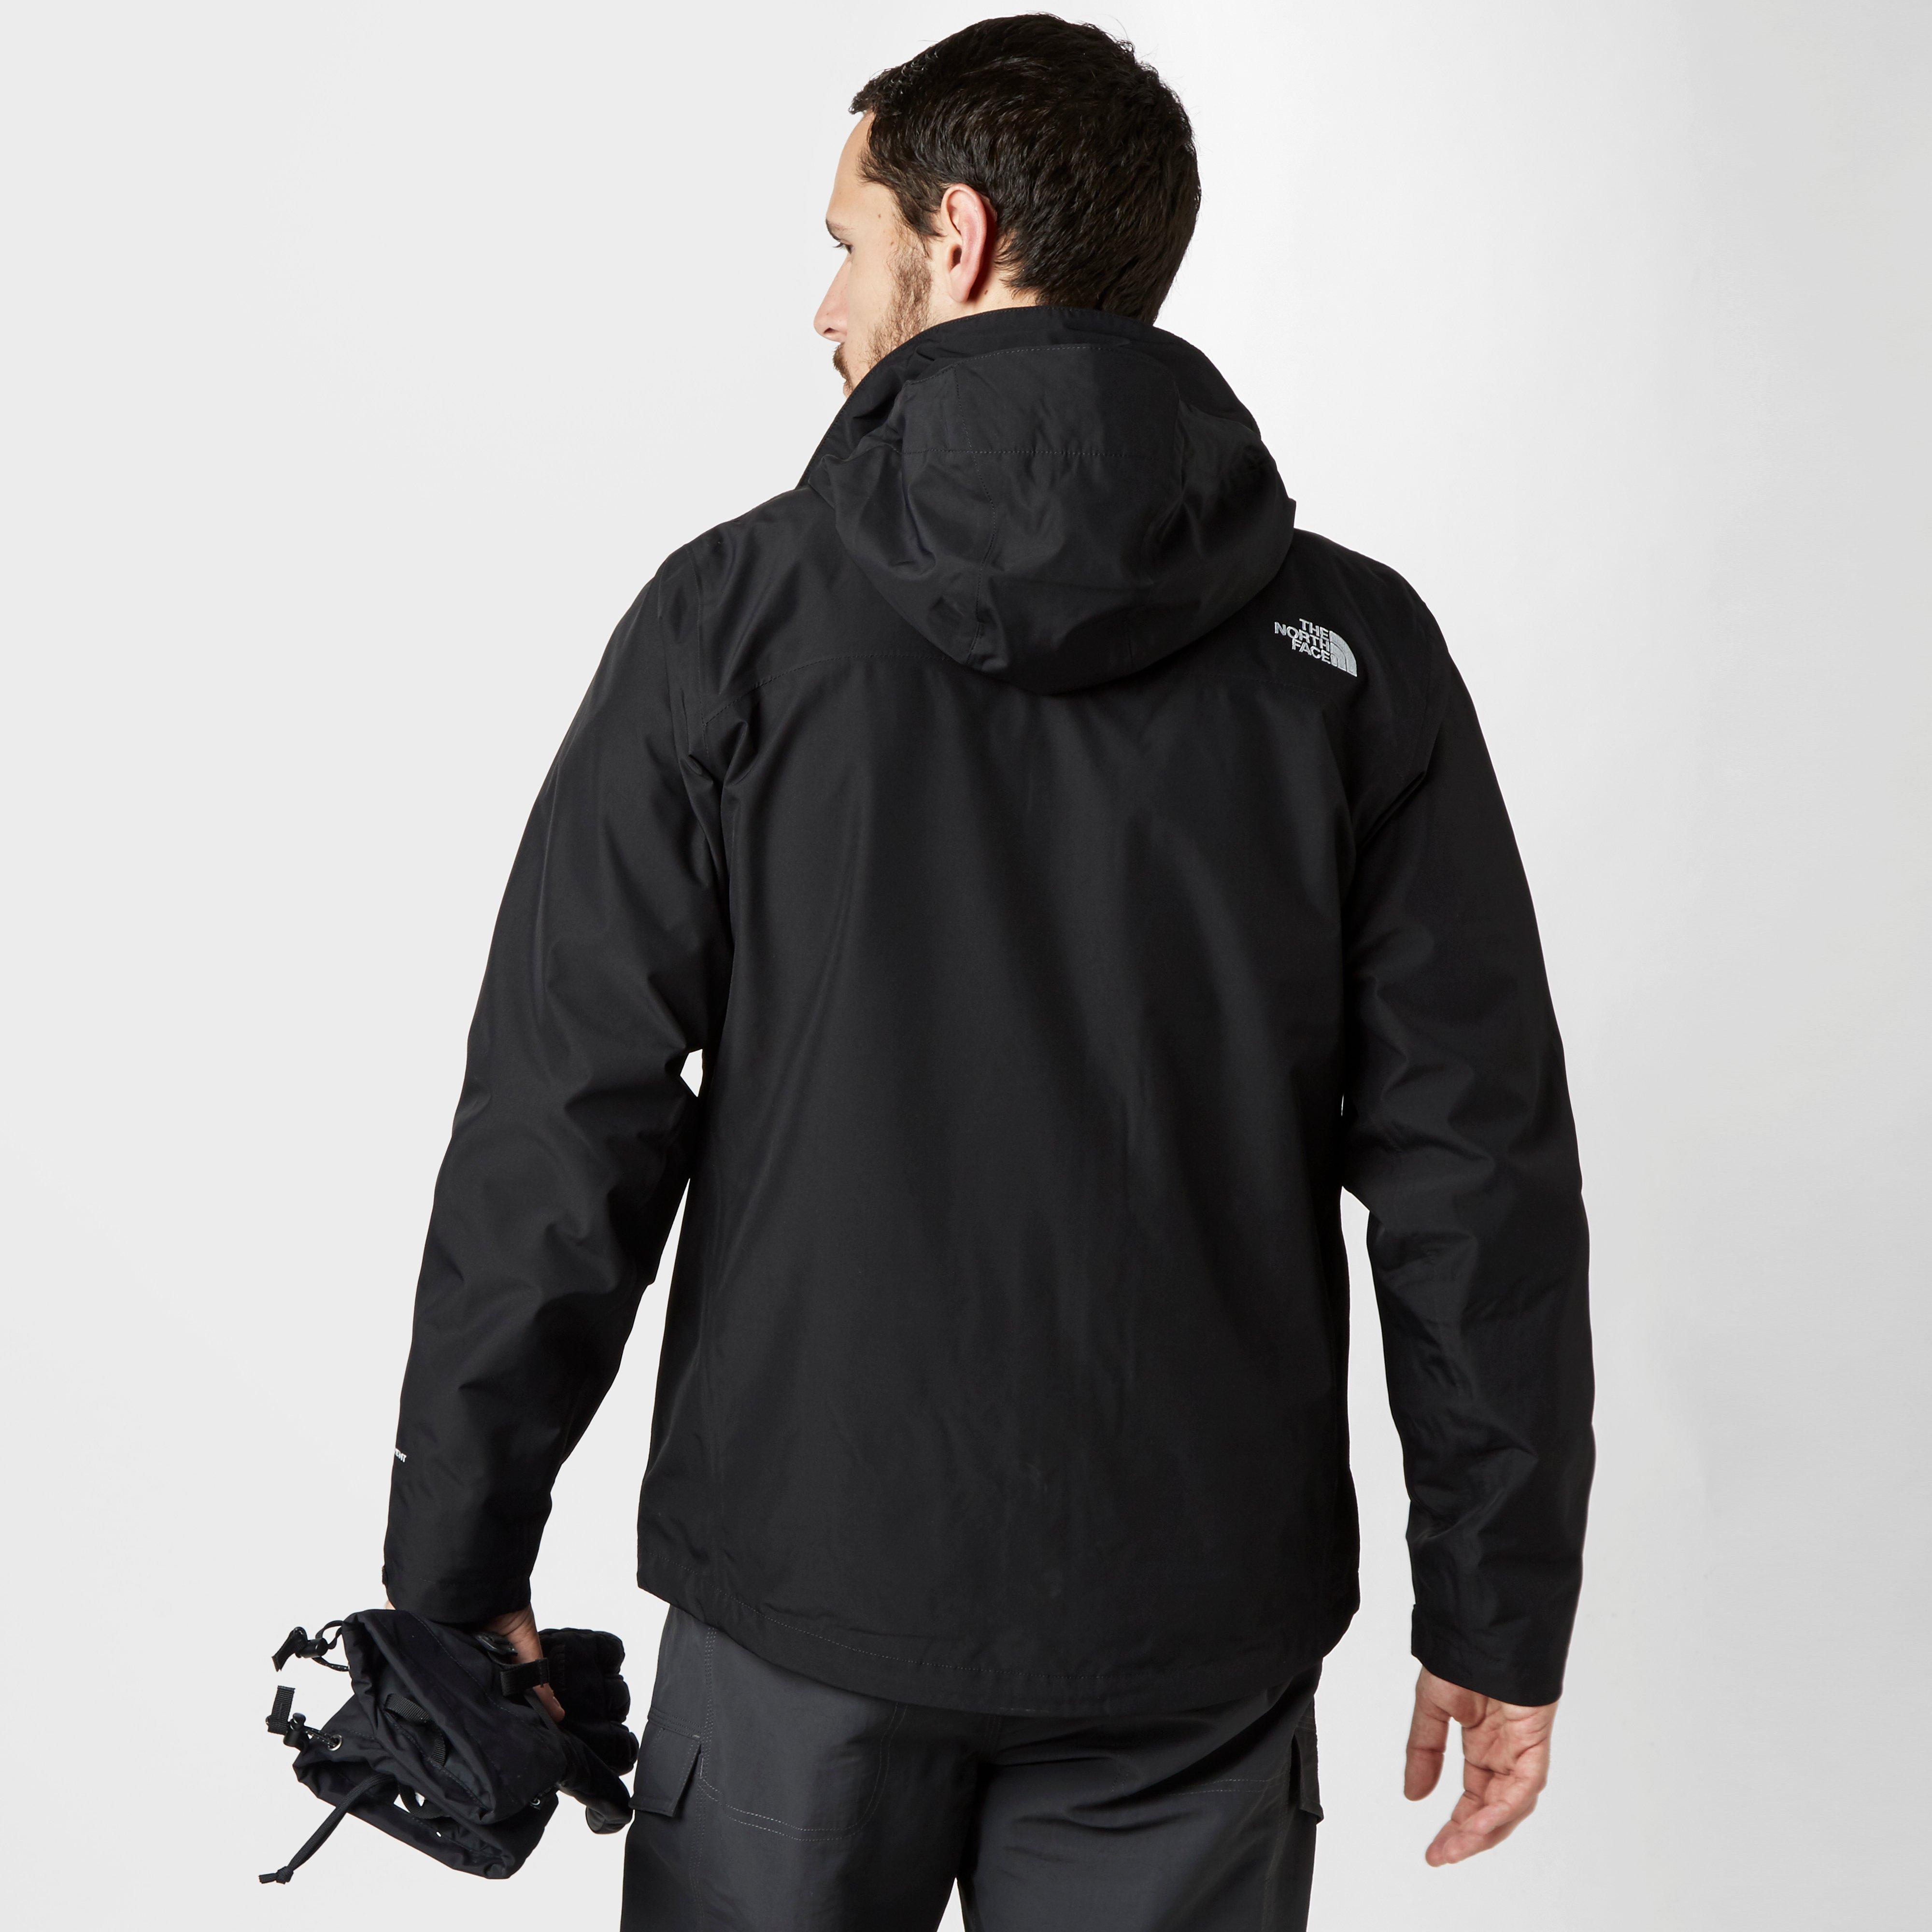 the north face sangro jacket review